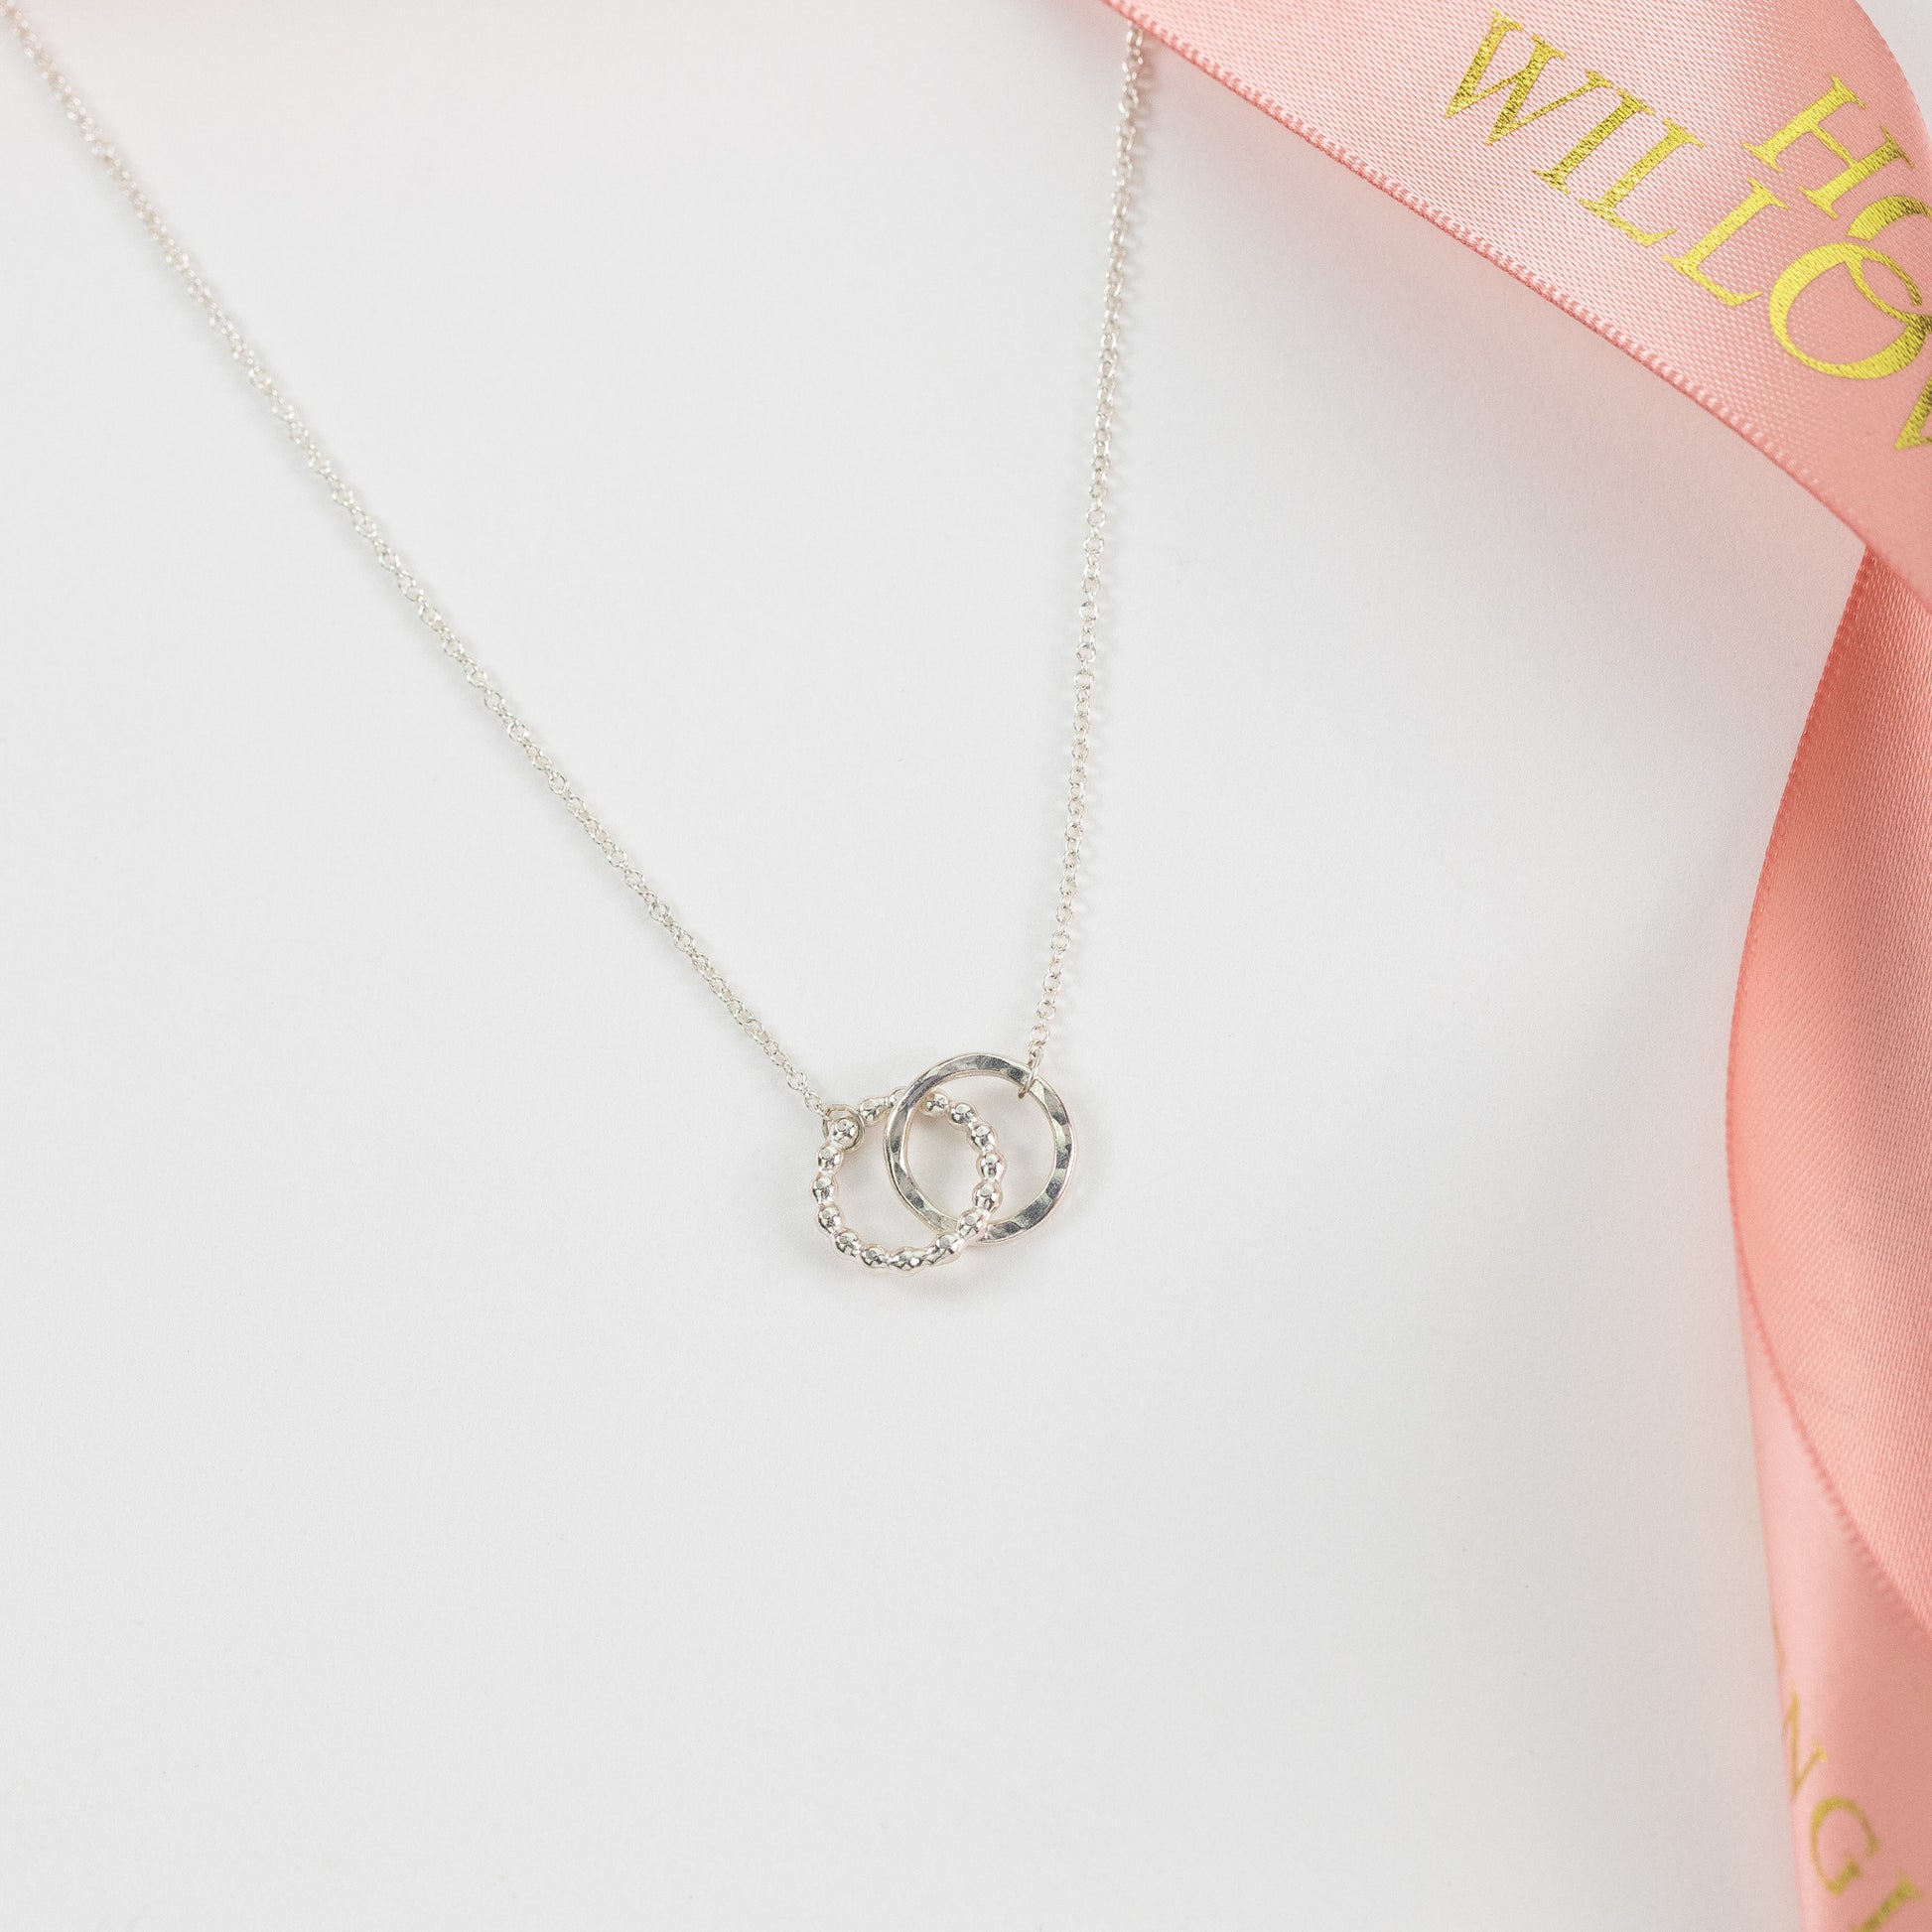 Gift for Sister - Love Link Necklace - Silver